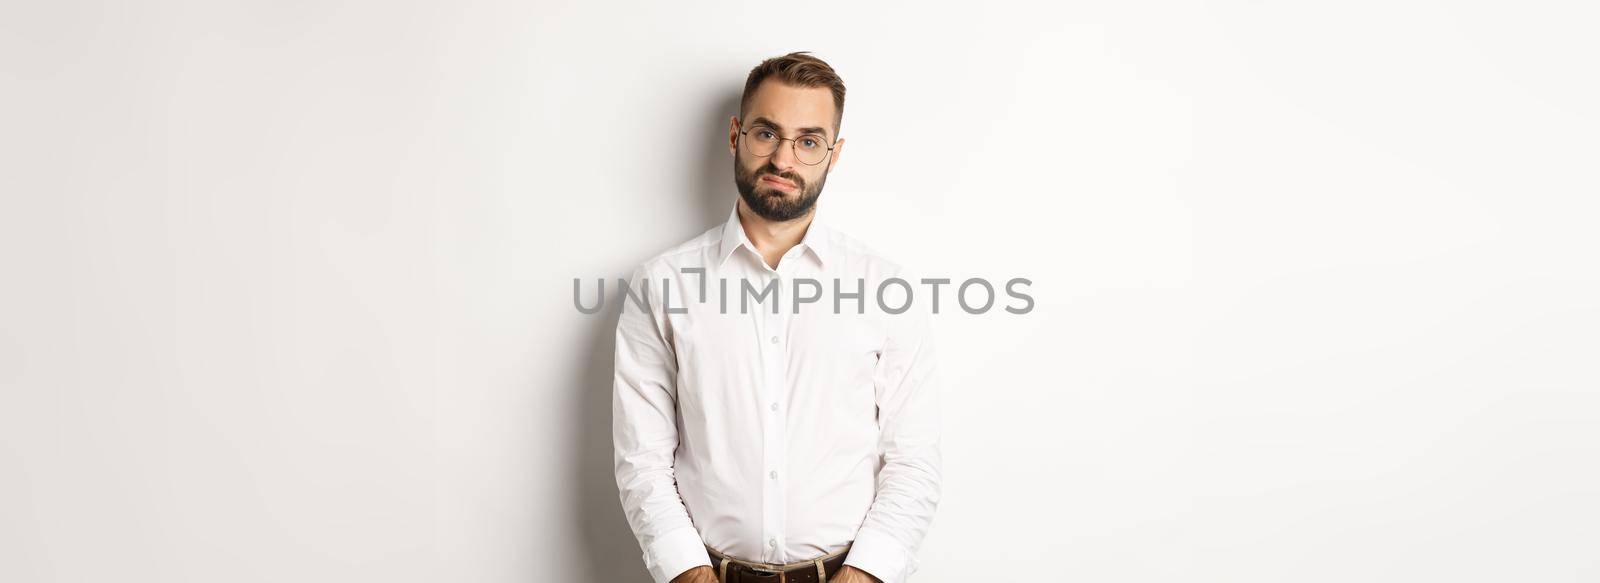 Sad and gloomy office manage frowning, standing tired against white background.